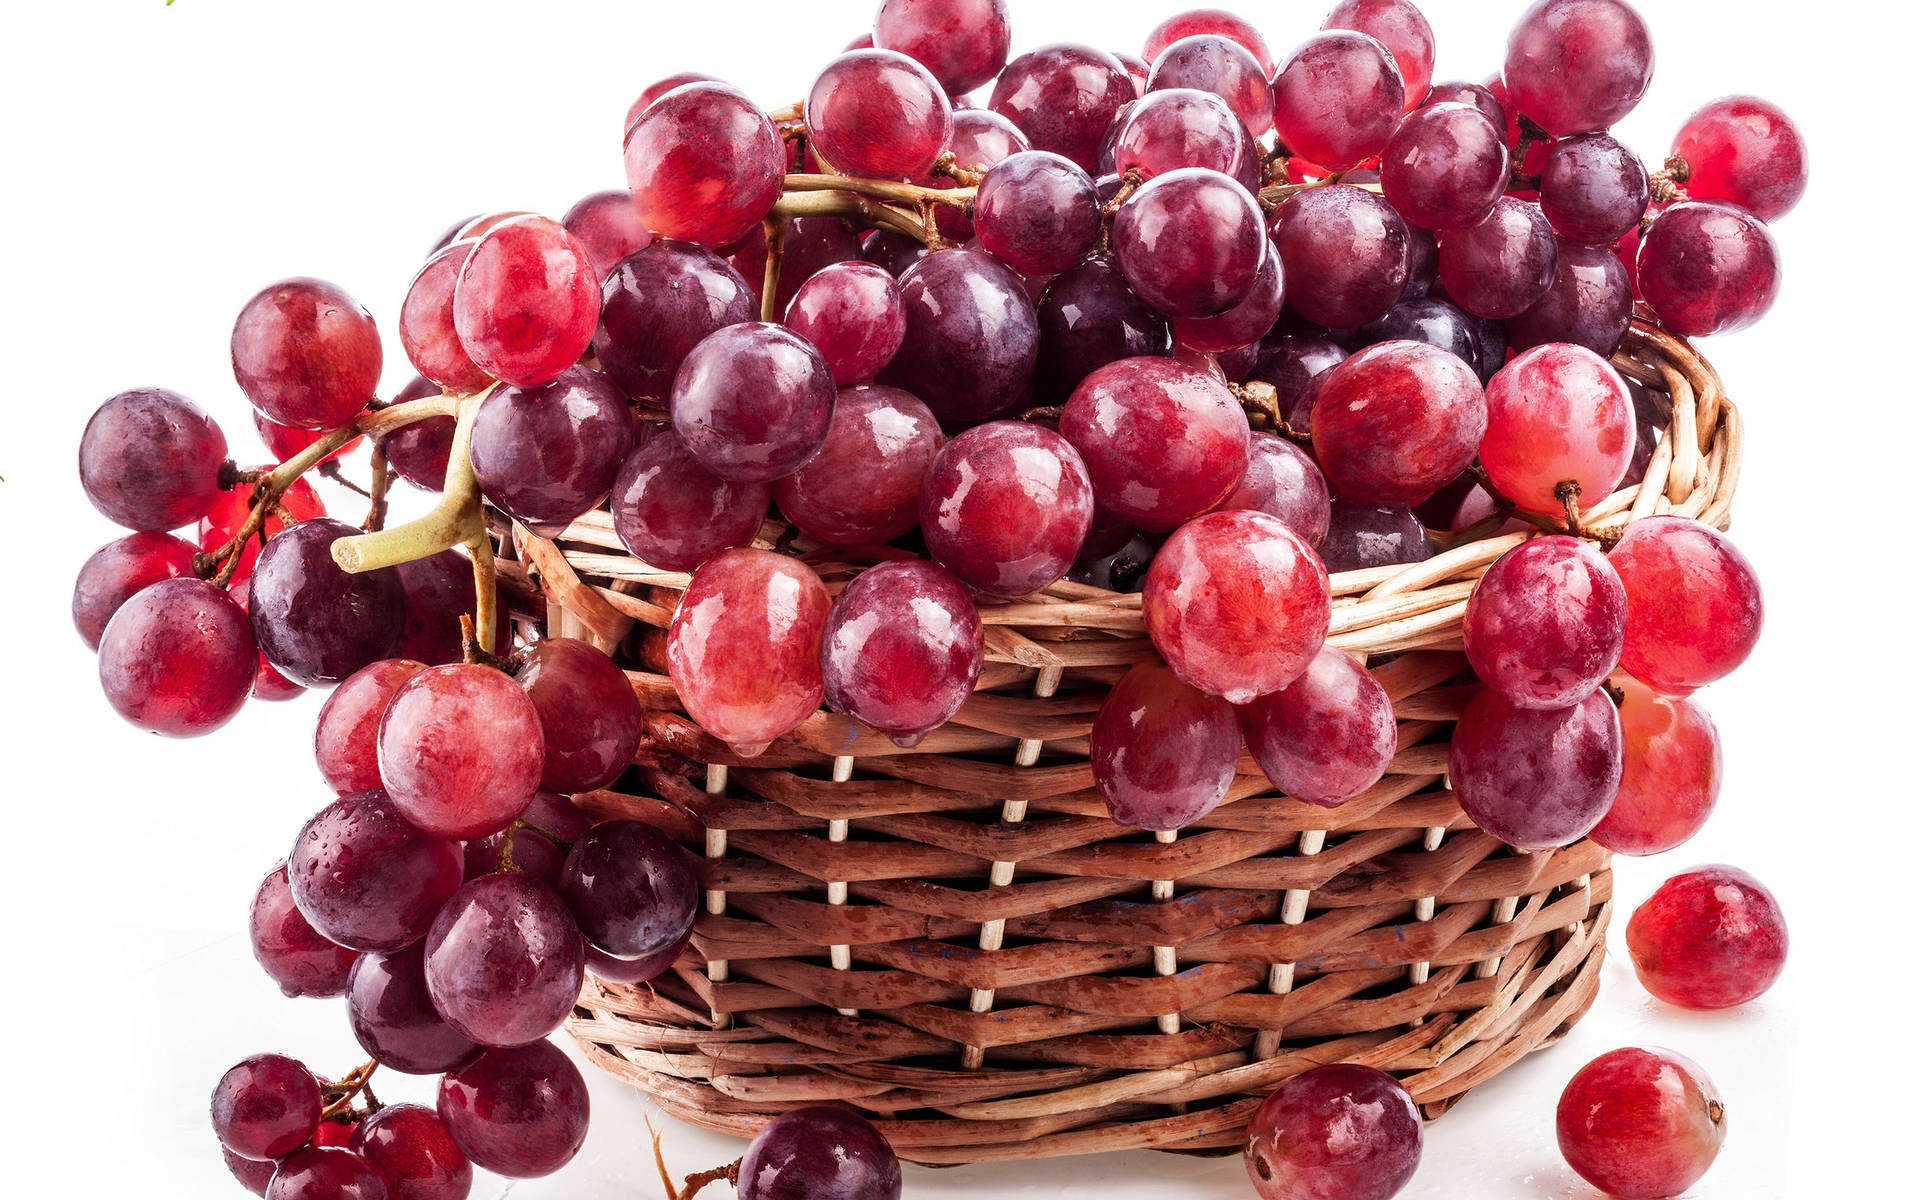 A Basket Full Of Luscious Red Grapes.